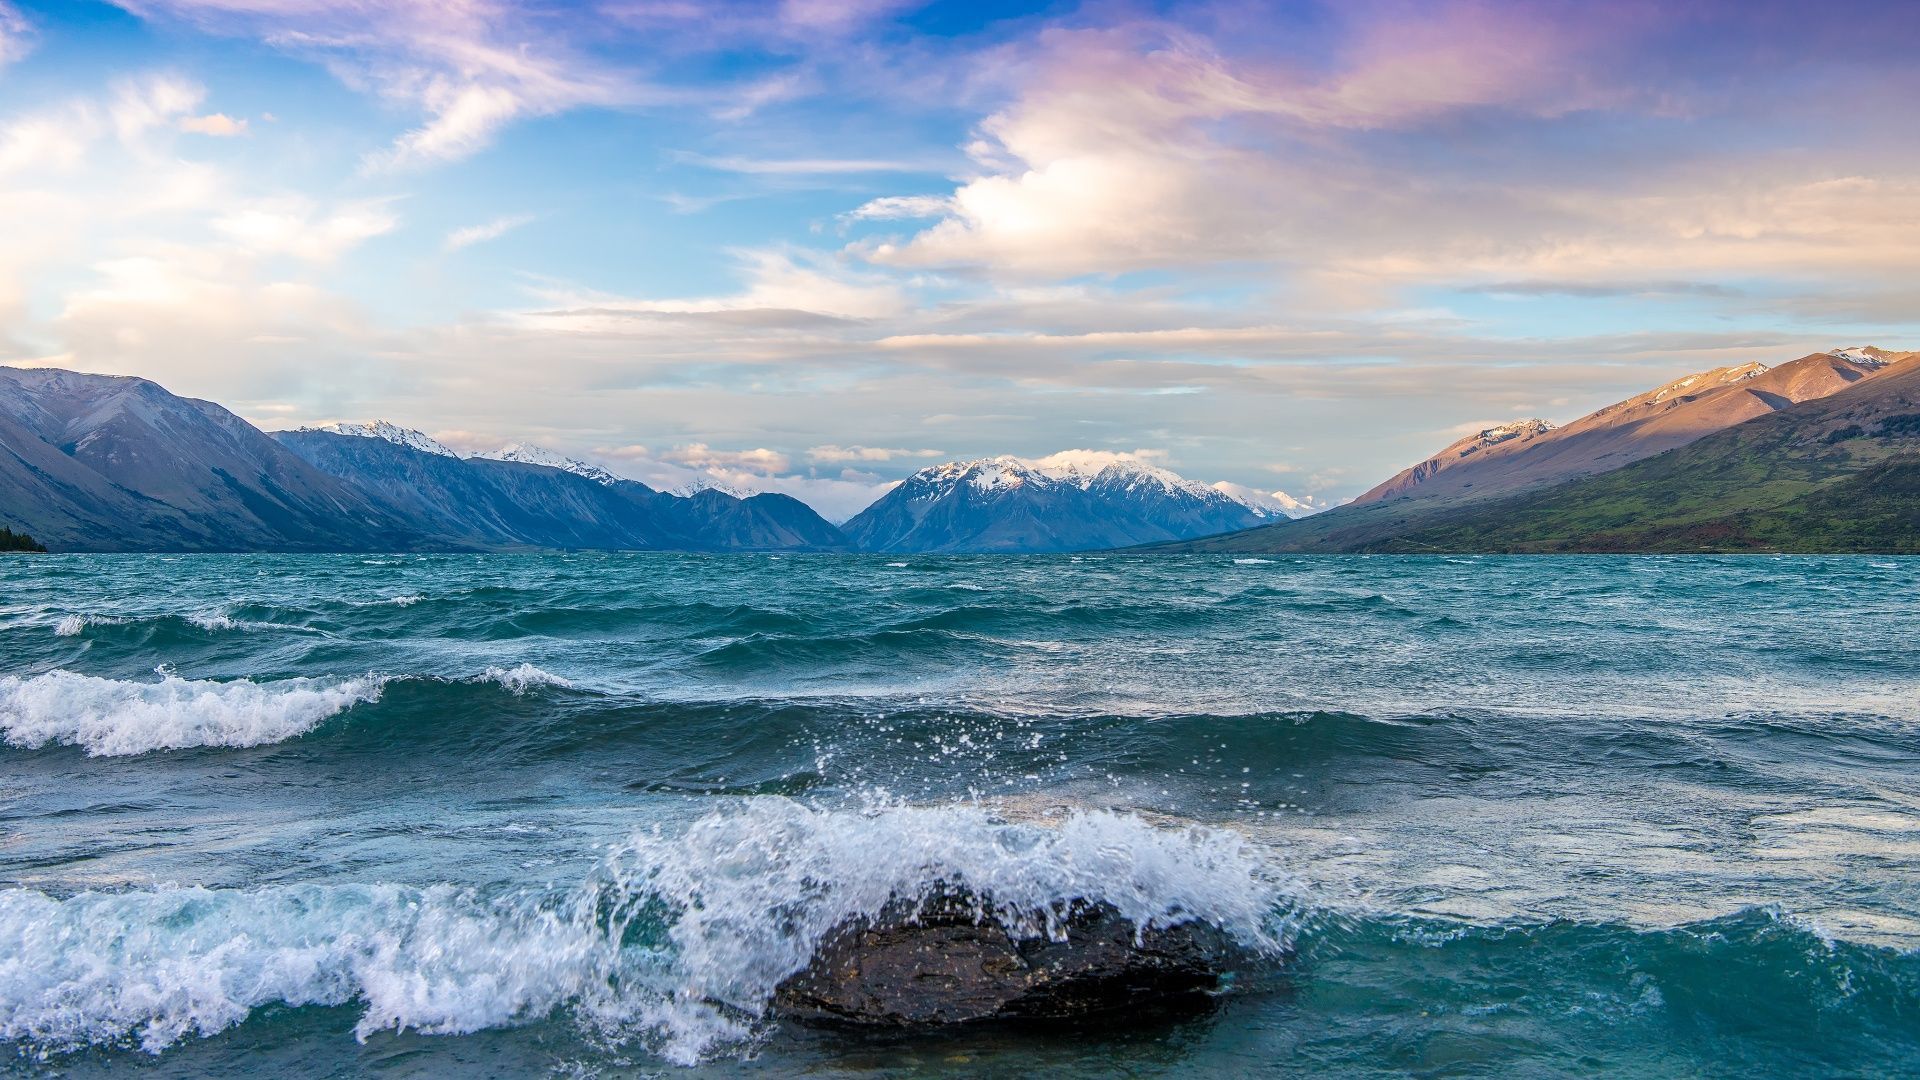 The ocean waves crashing against a rock in the foreground with snow capped mountains in the background. - Lake